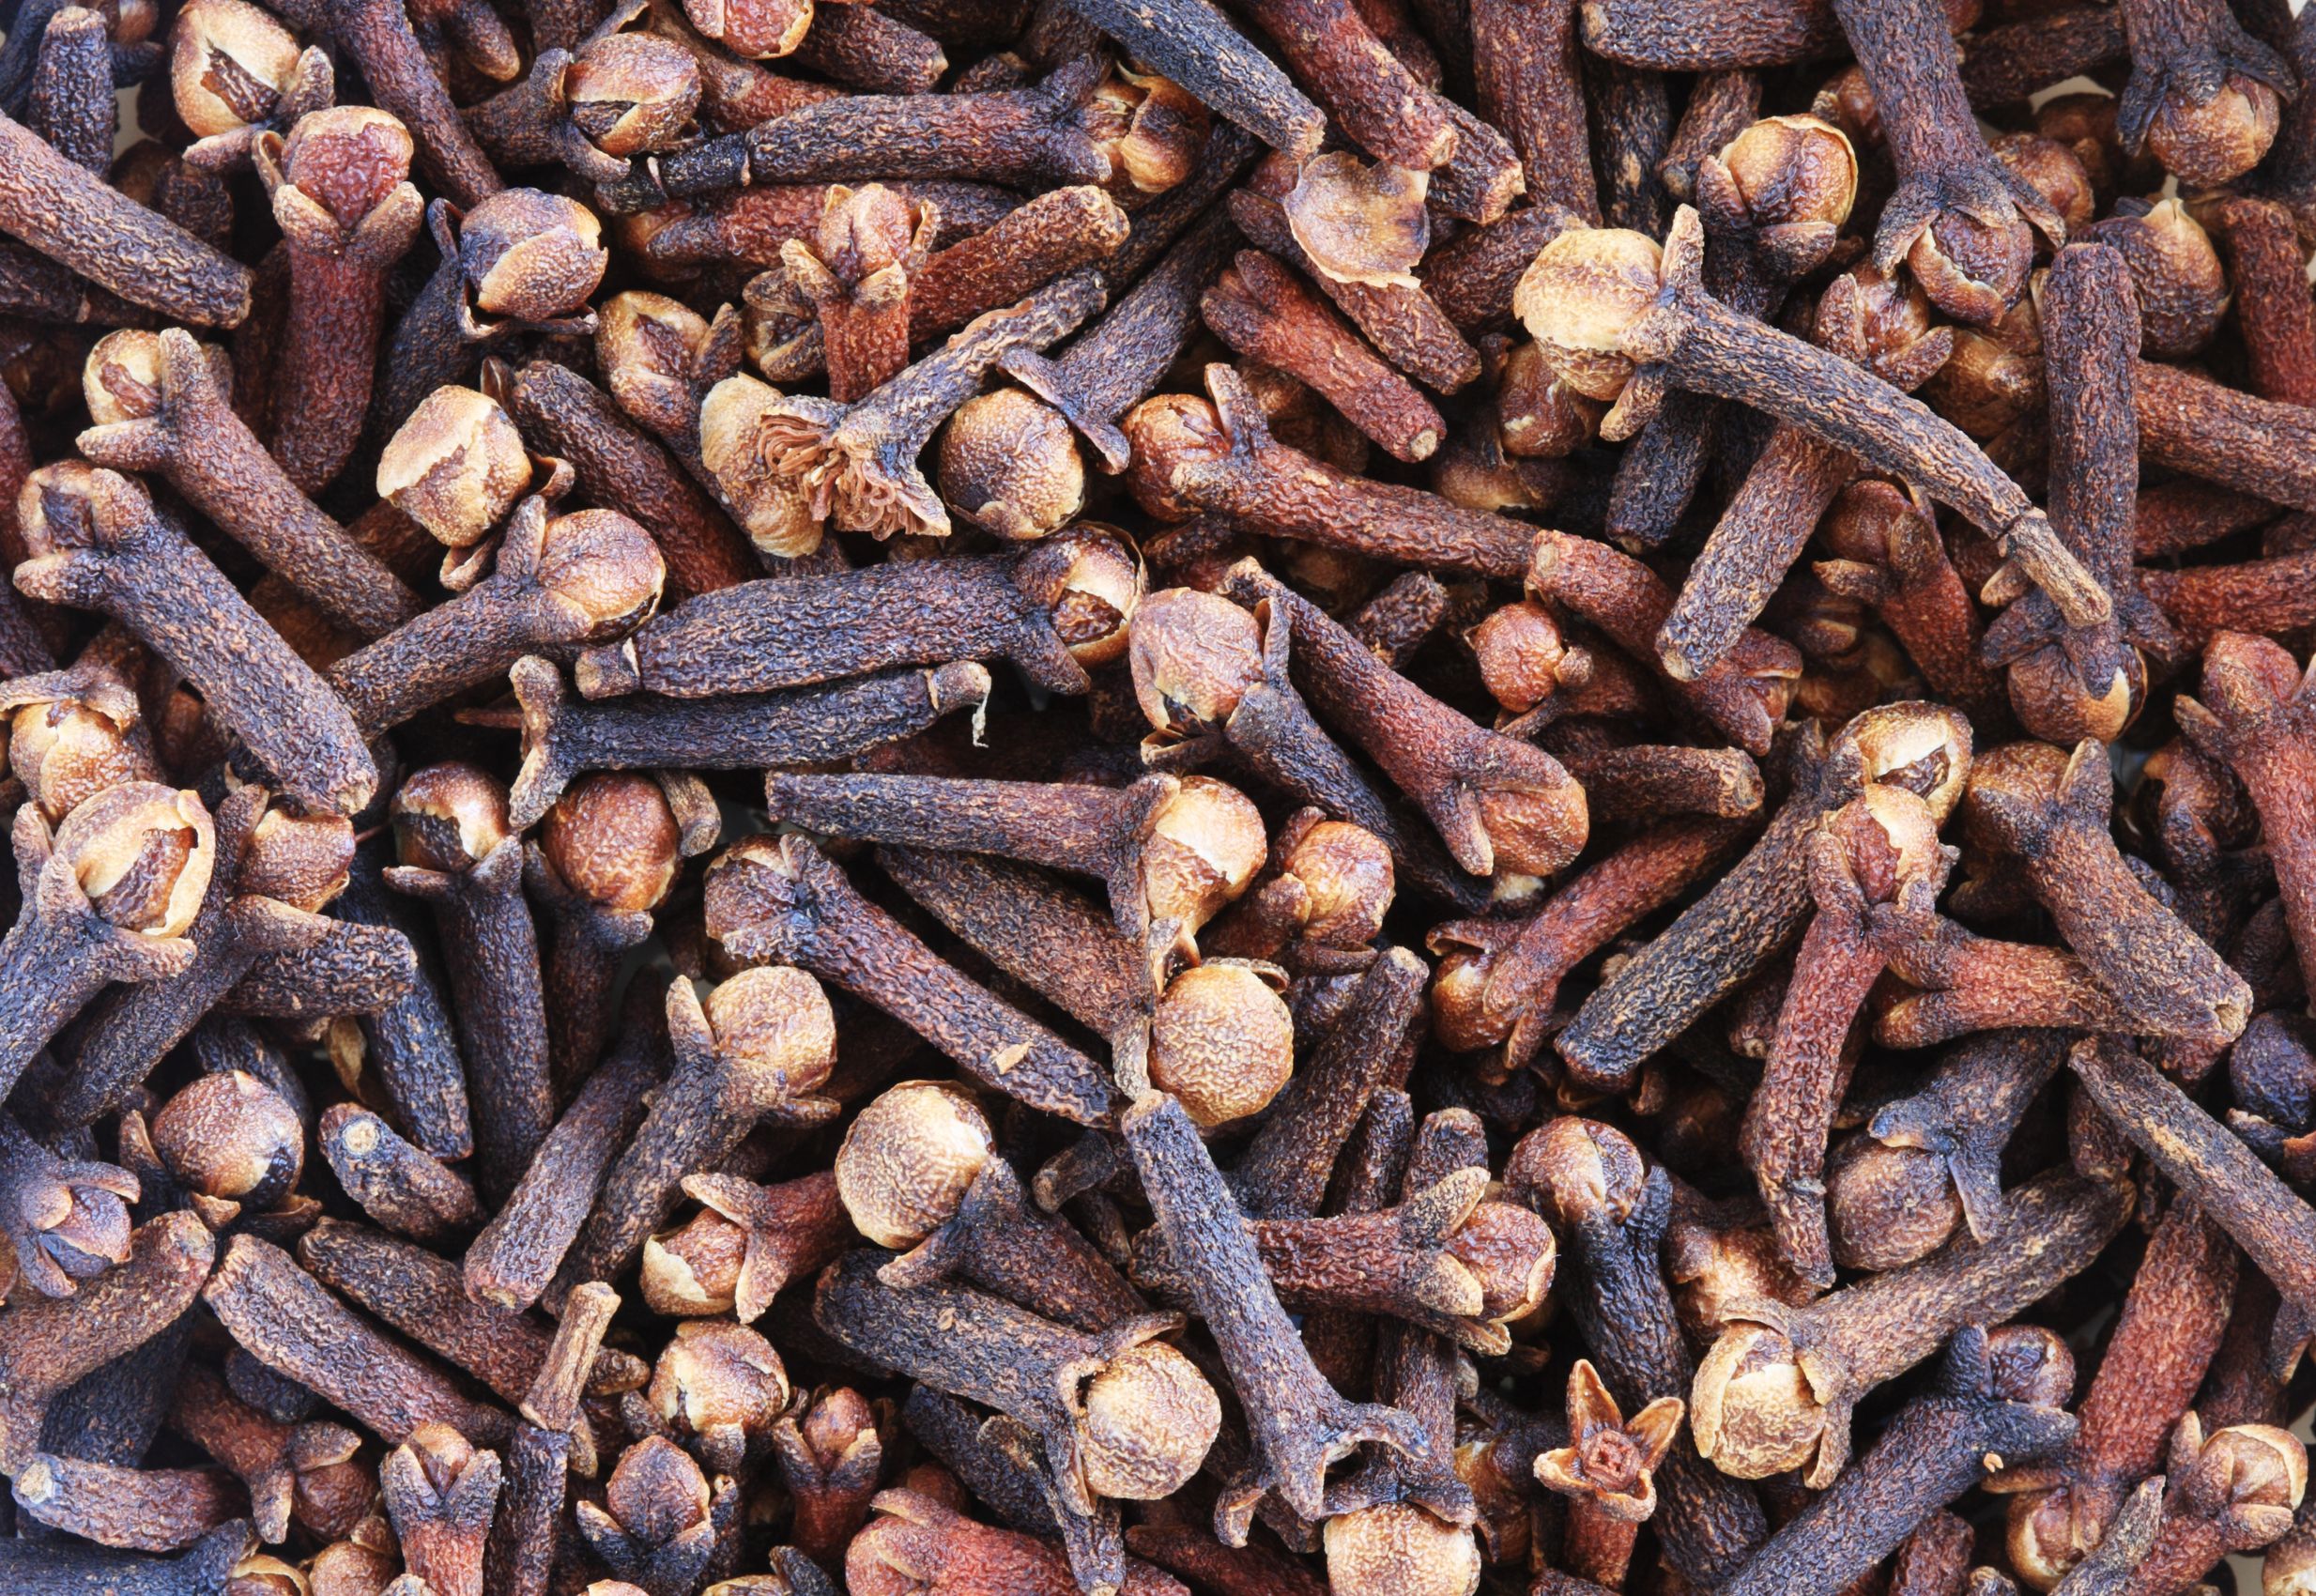 Clove Bud Essential Oil Uses and Benefits